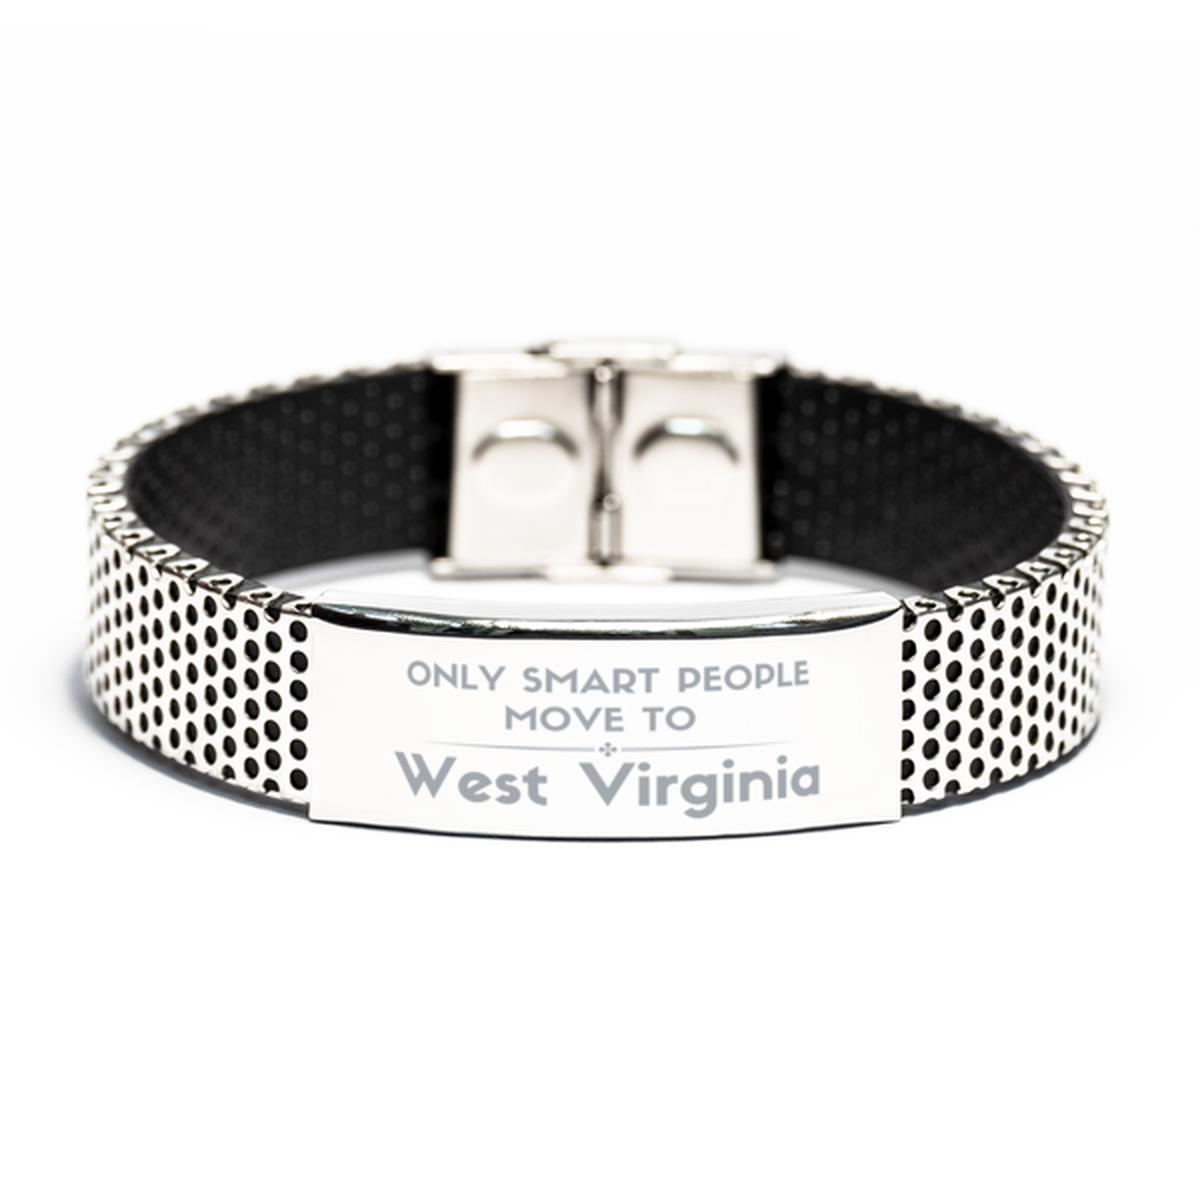 Only smart people move to West Virginia Stainless Steel Bracelet, Gag Gifts For West Virginia, Move to West Virginia Gifts for Friends Coworker Funny Saying Quote